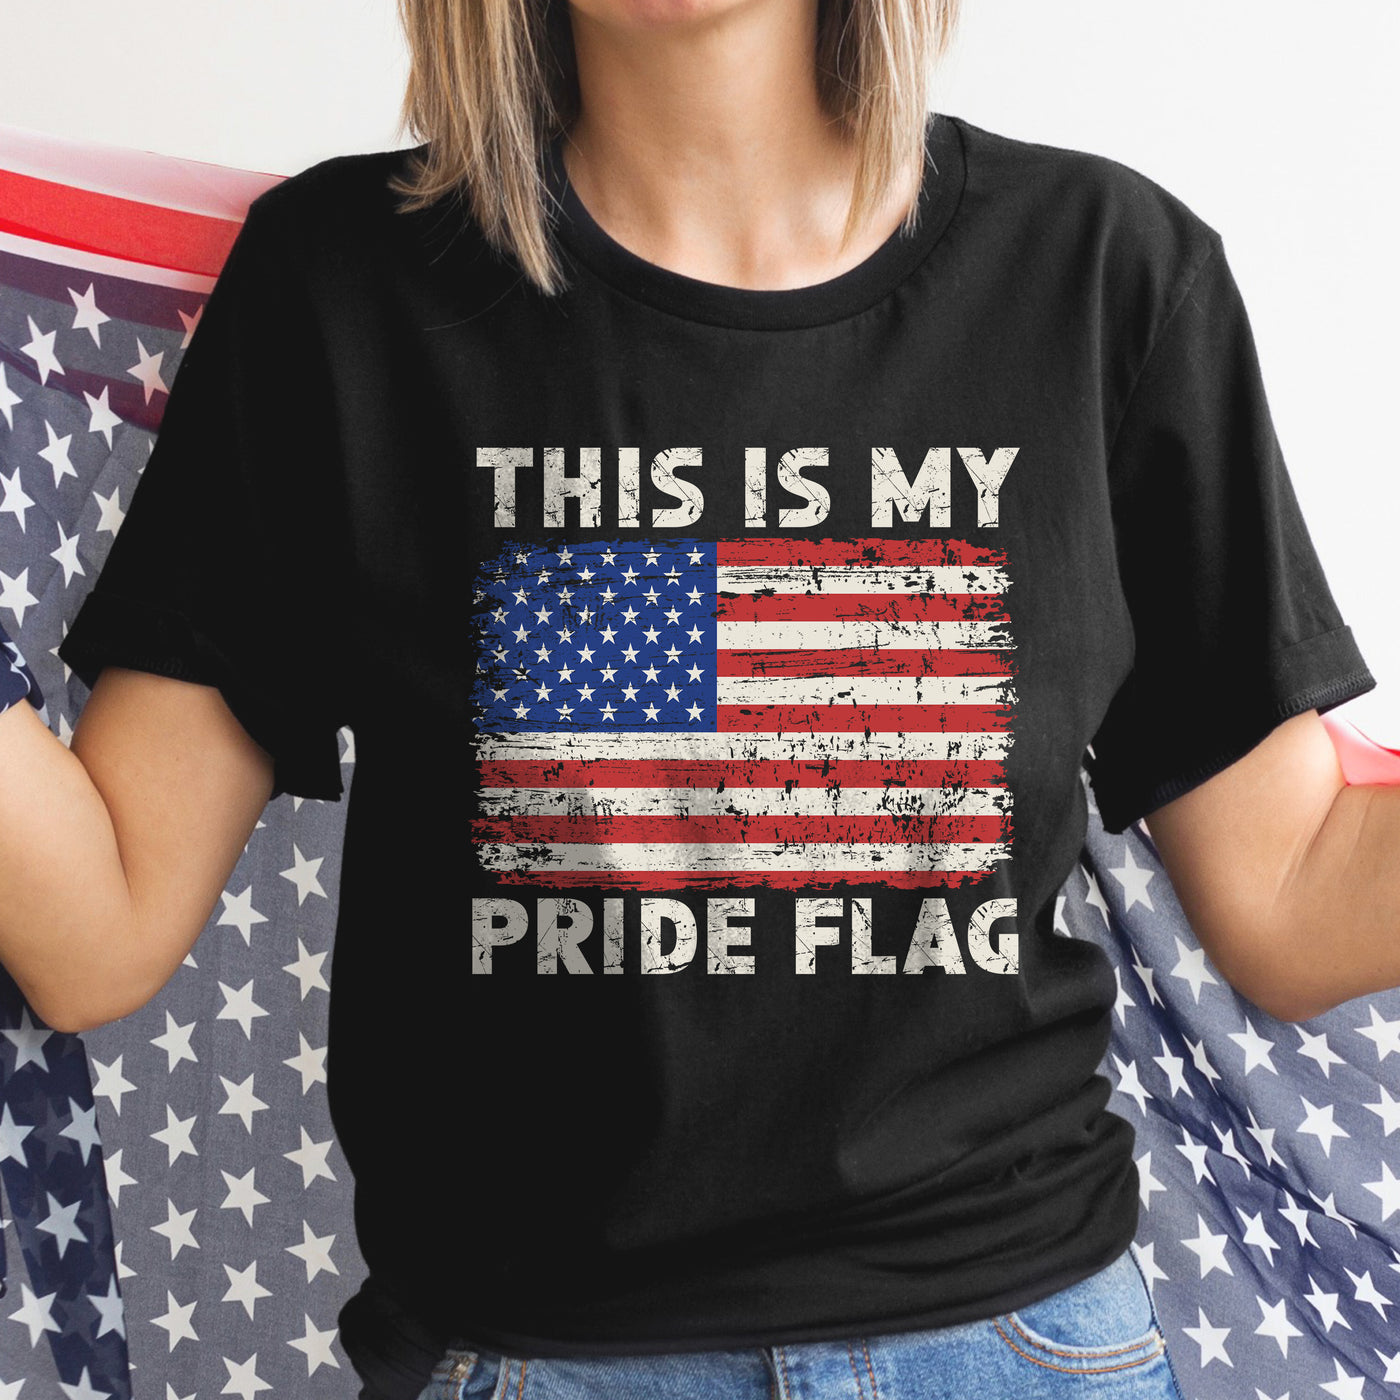 This Is My Pride Flag T-shirt